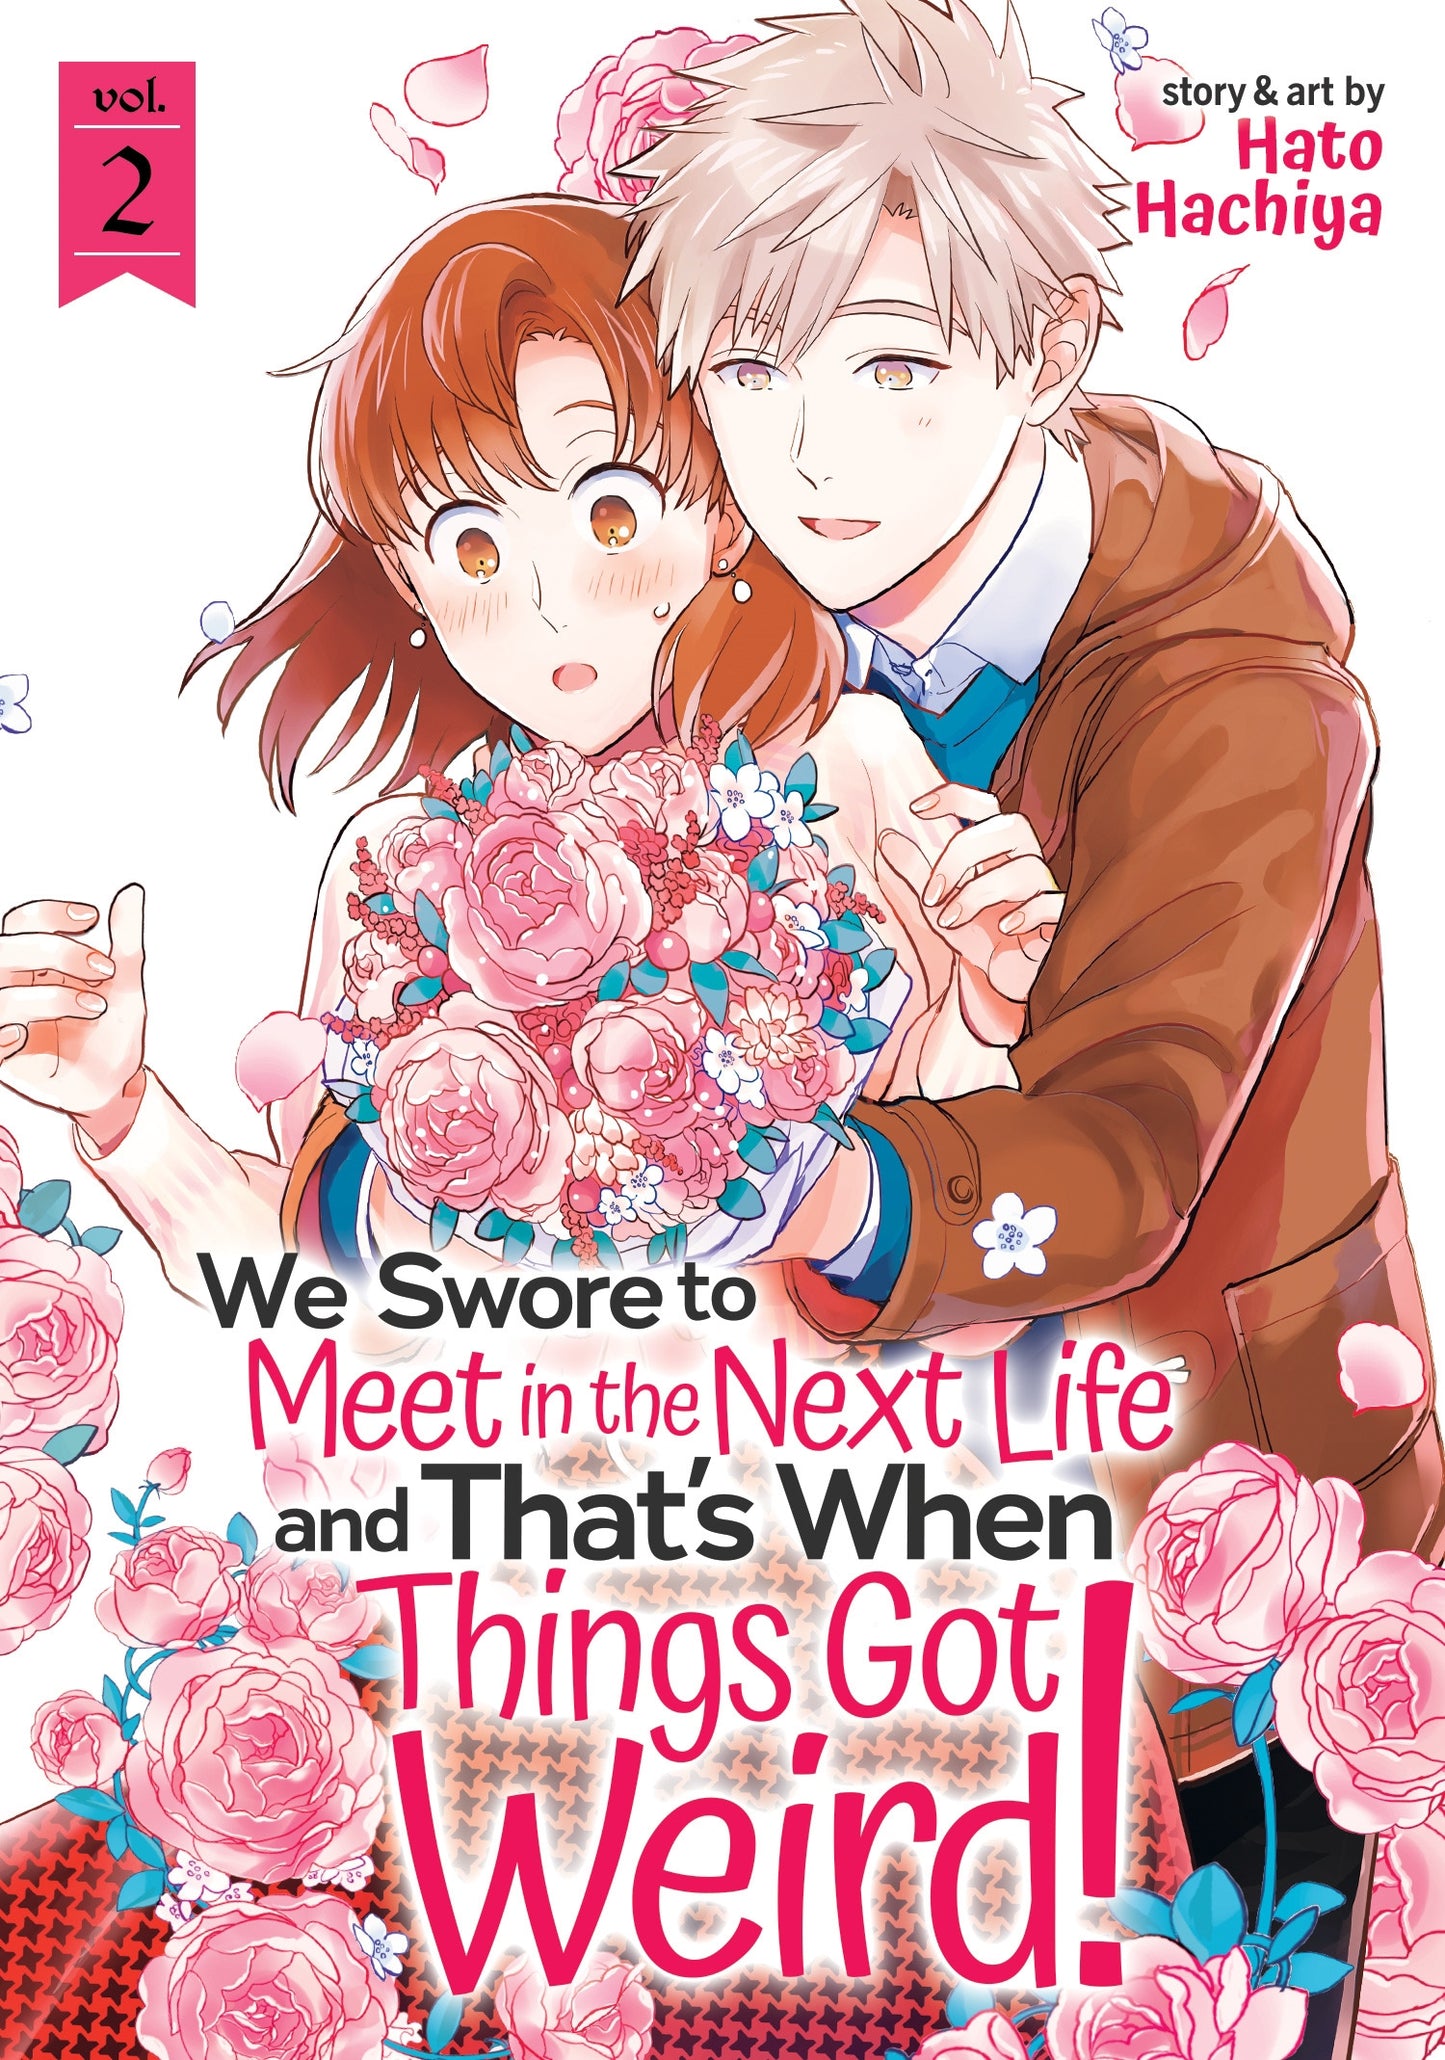 We Swore to Meet in the Next Life and That's When Things Got Weird! Vol. 2 - Manga Warehouse